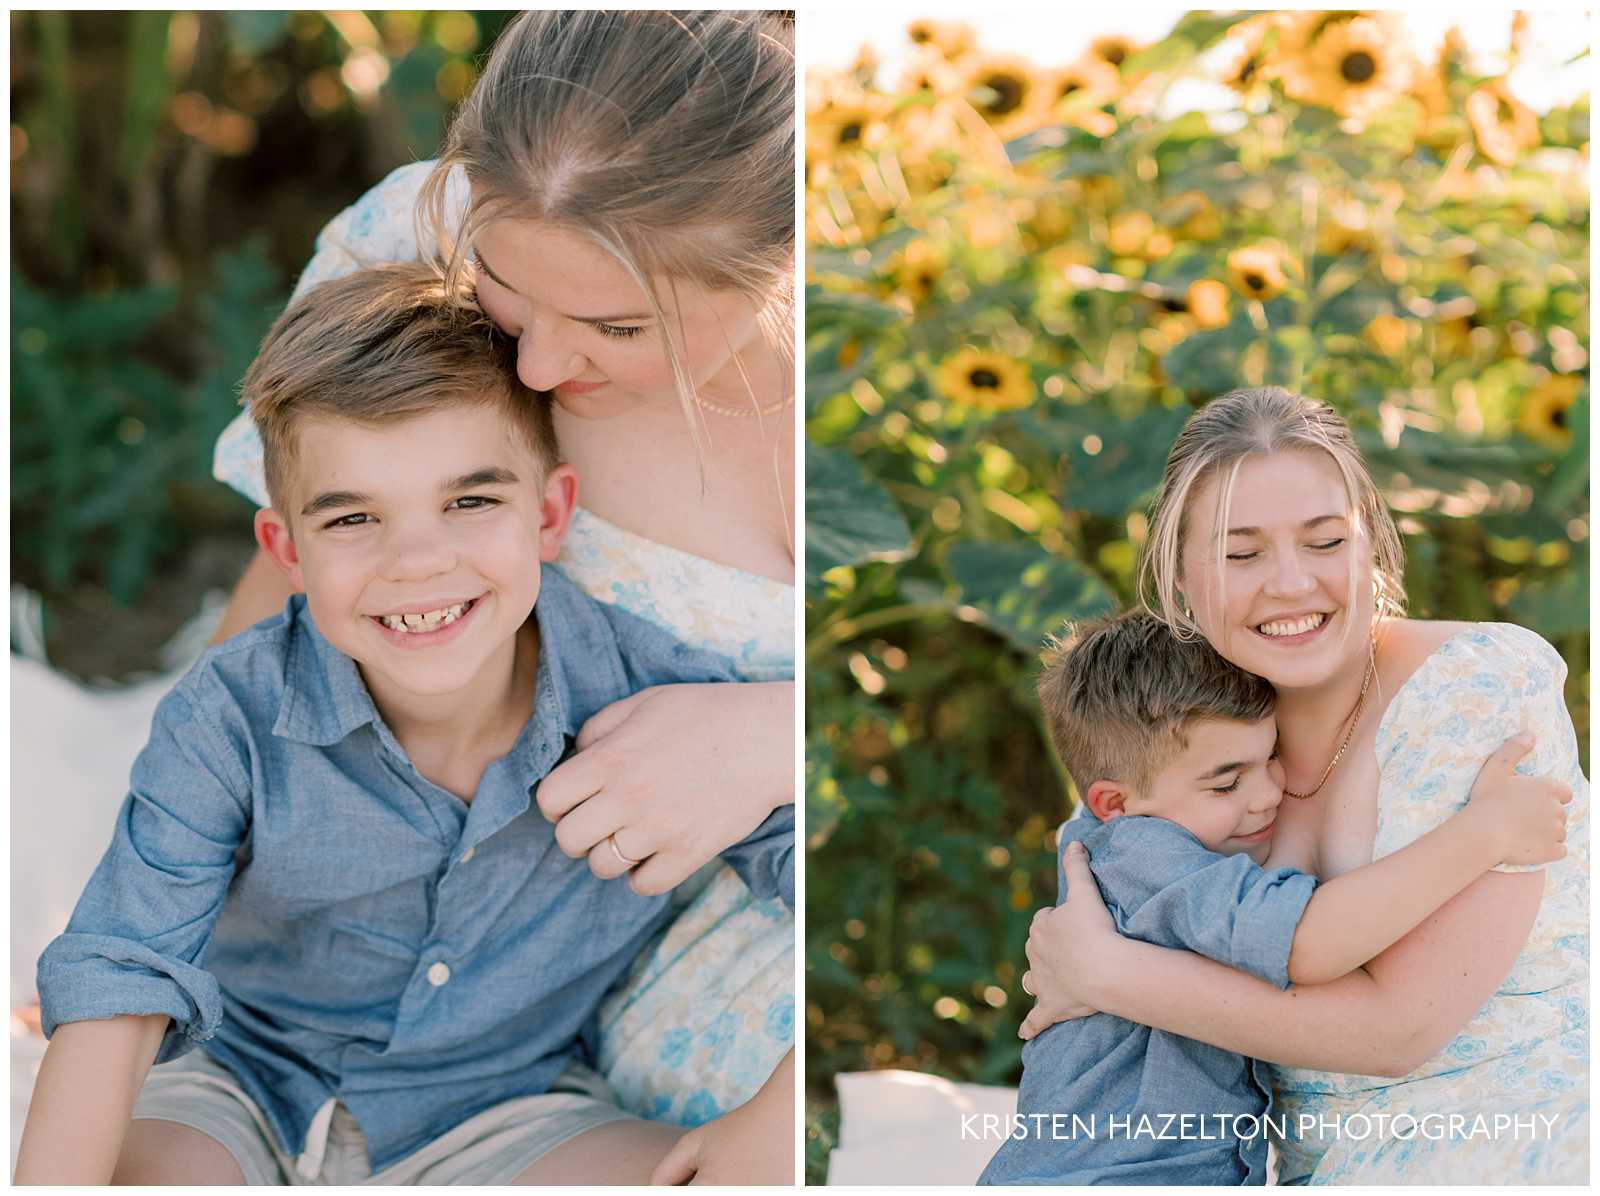 Mom and son snuggling during their sunflower photo session